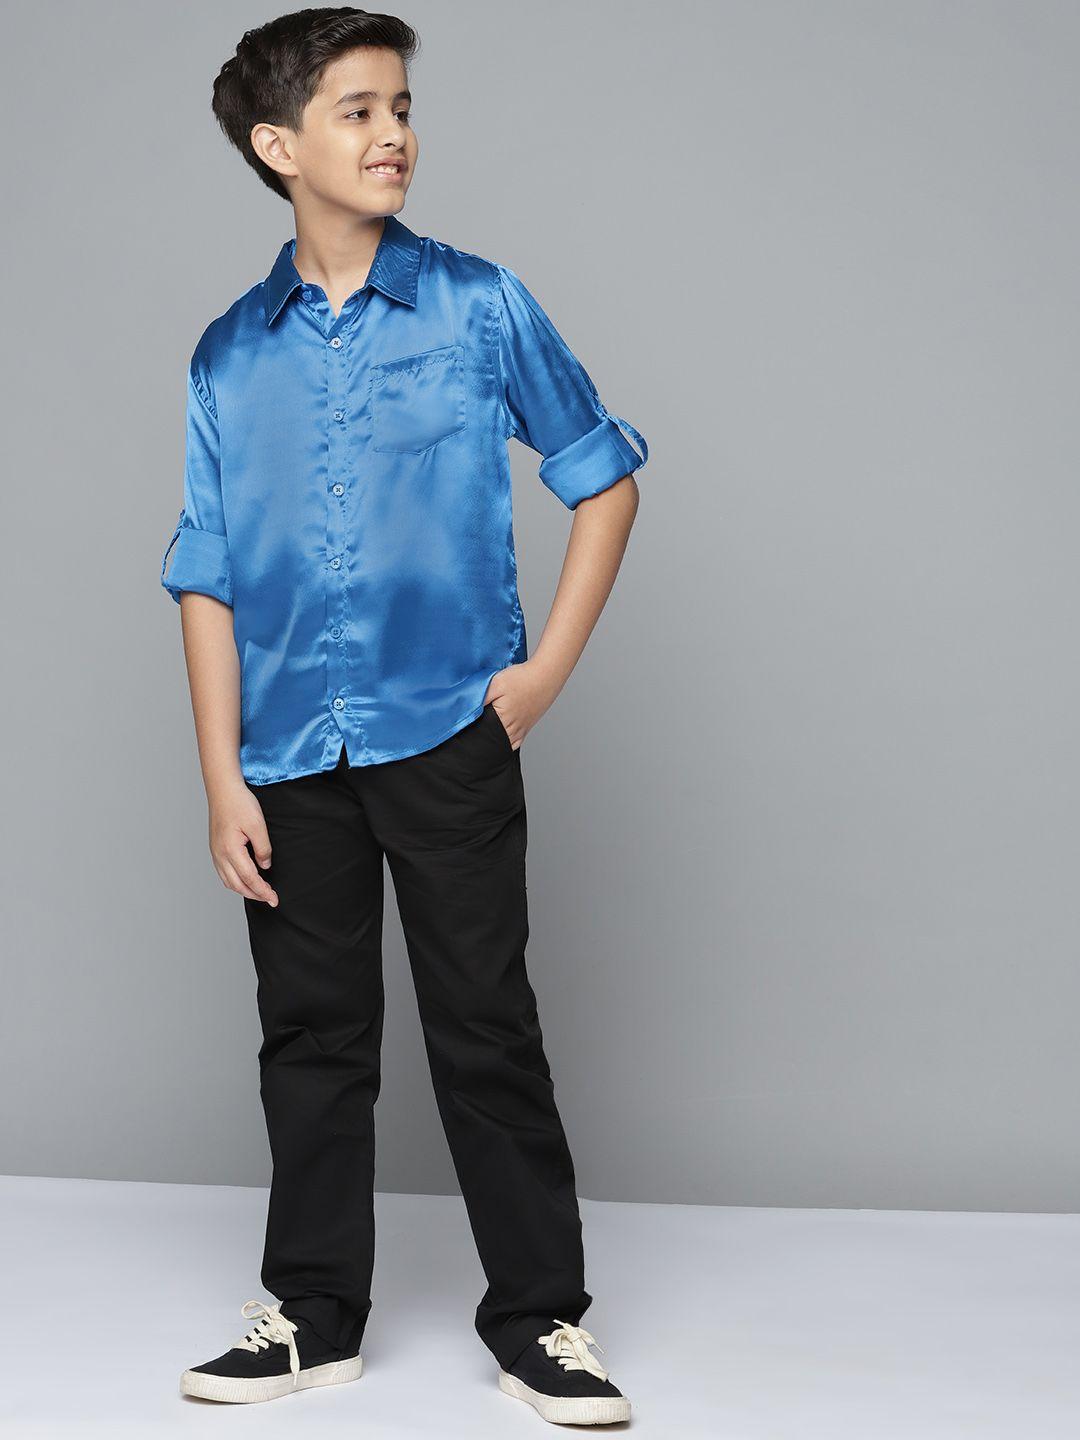 yk-boys-blue-&-black-solid-shirt-with-trousers